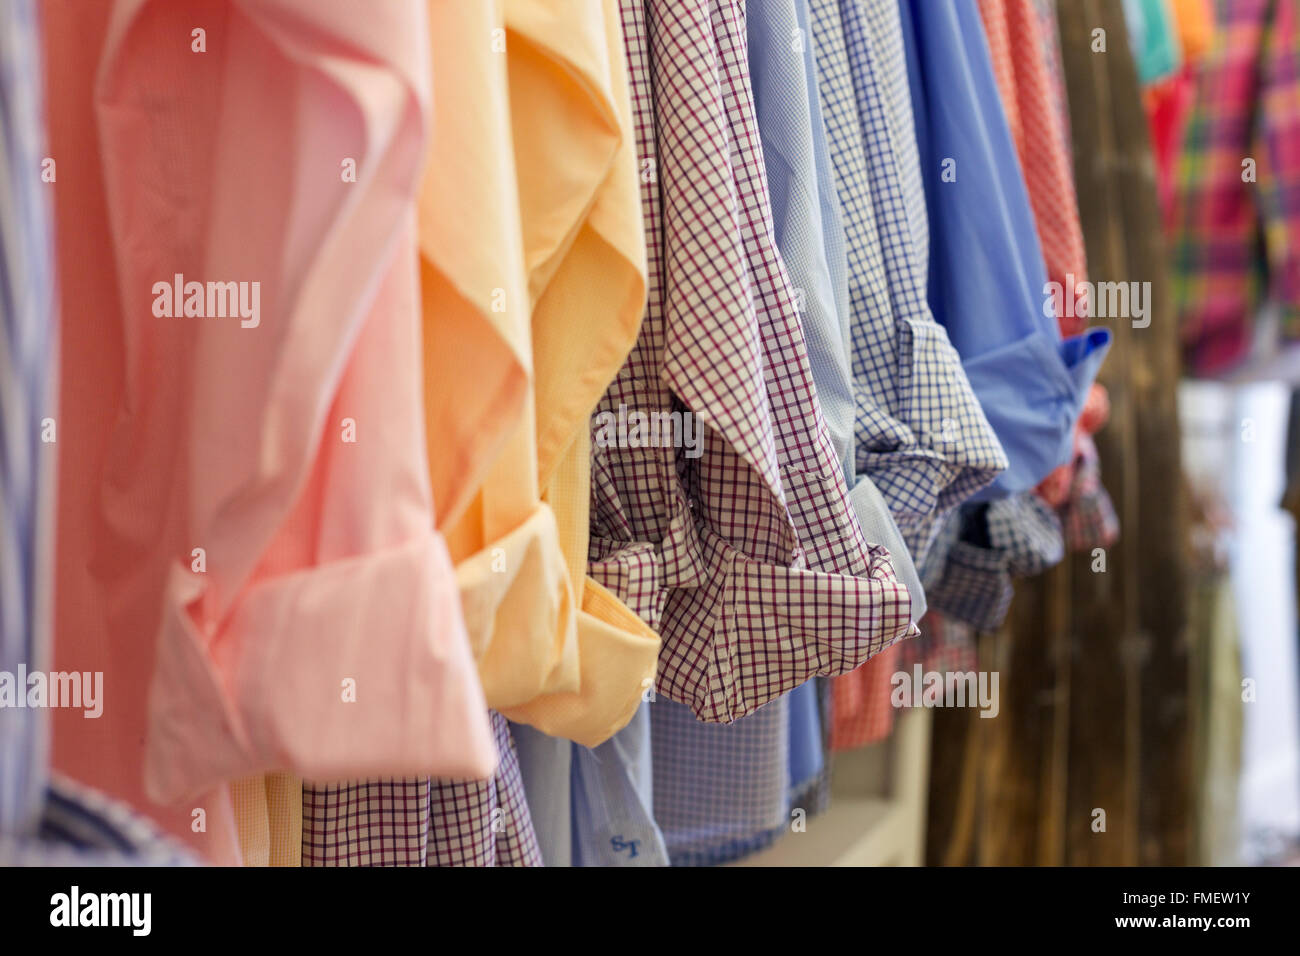 Men's cotton shirts, sleeves cuffed, hanging in a row. Stock Photo